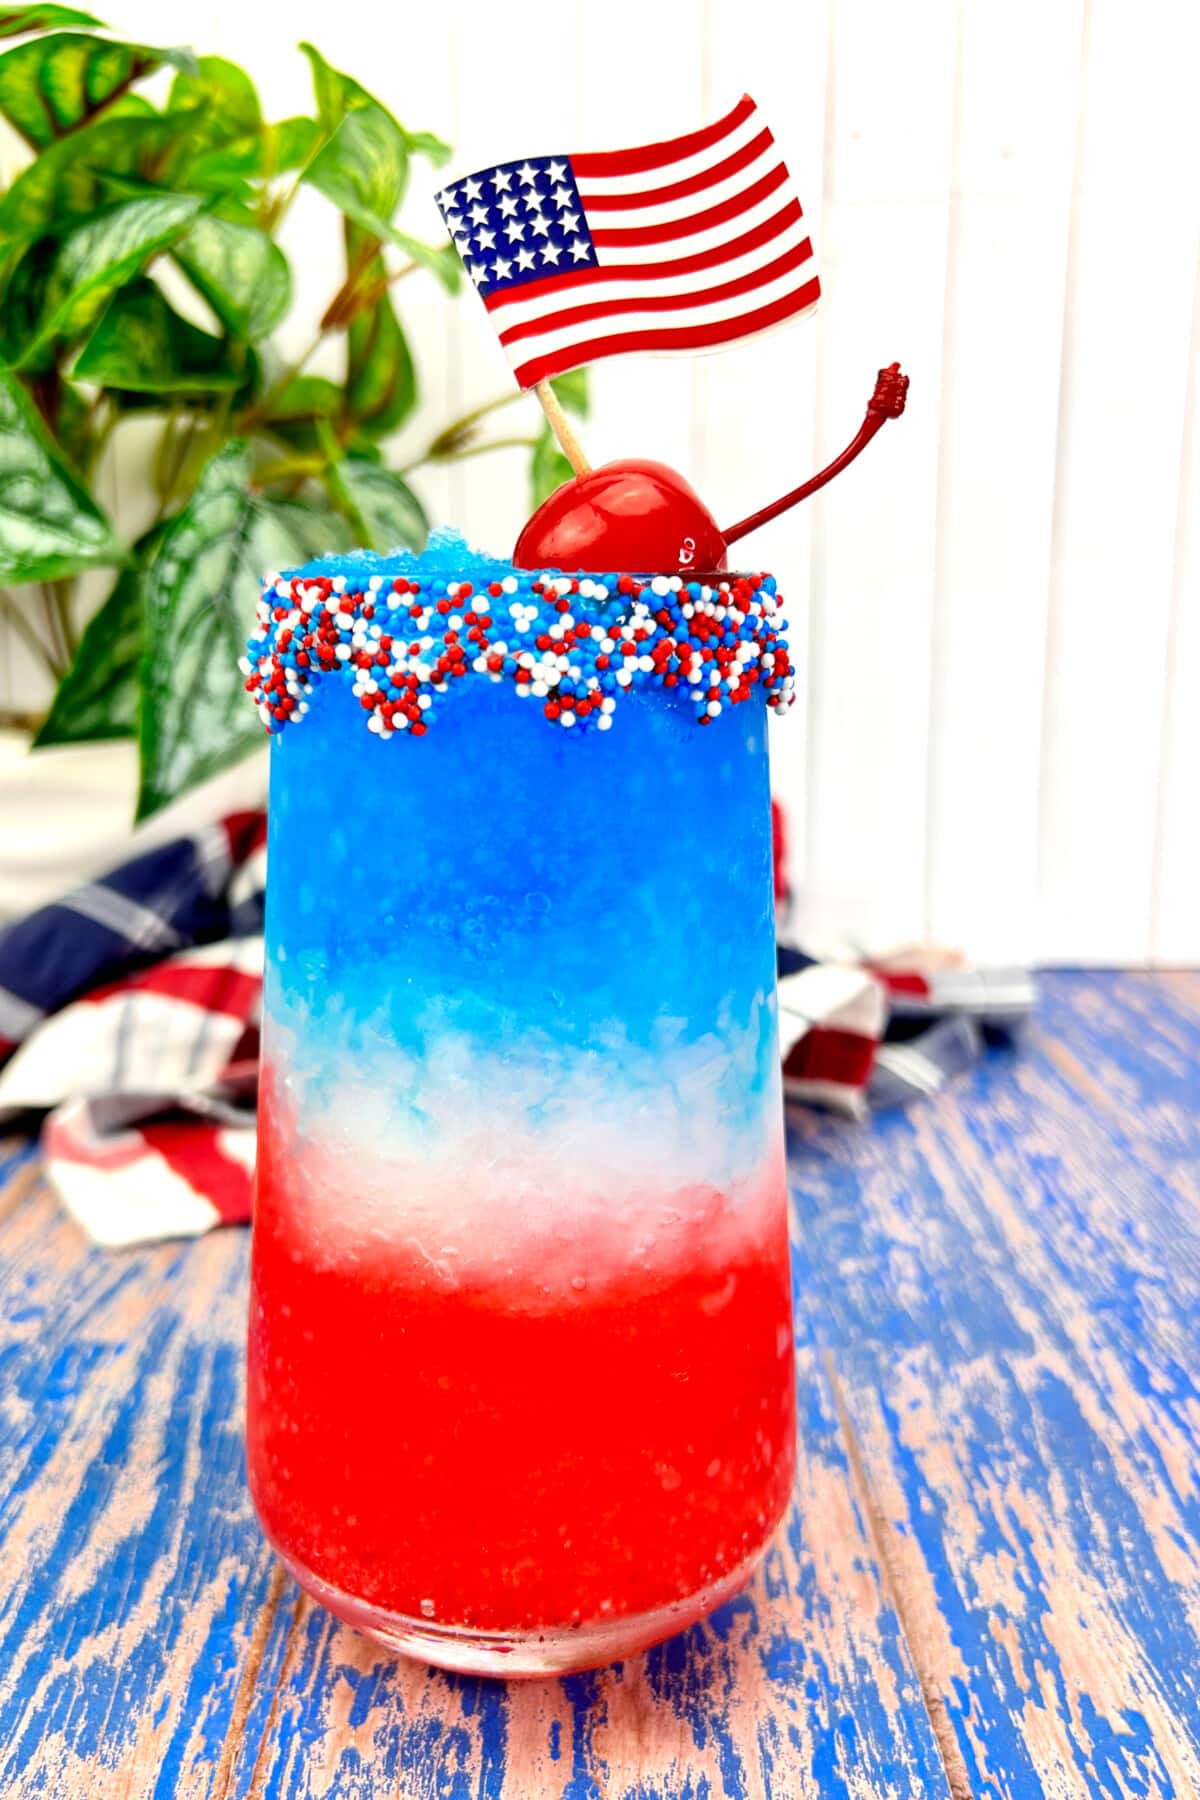 Red White and Blue Margaritas garnished with sprinkles and fresh fruit.